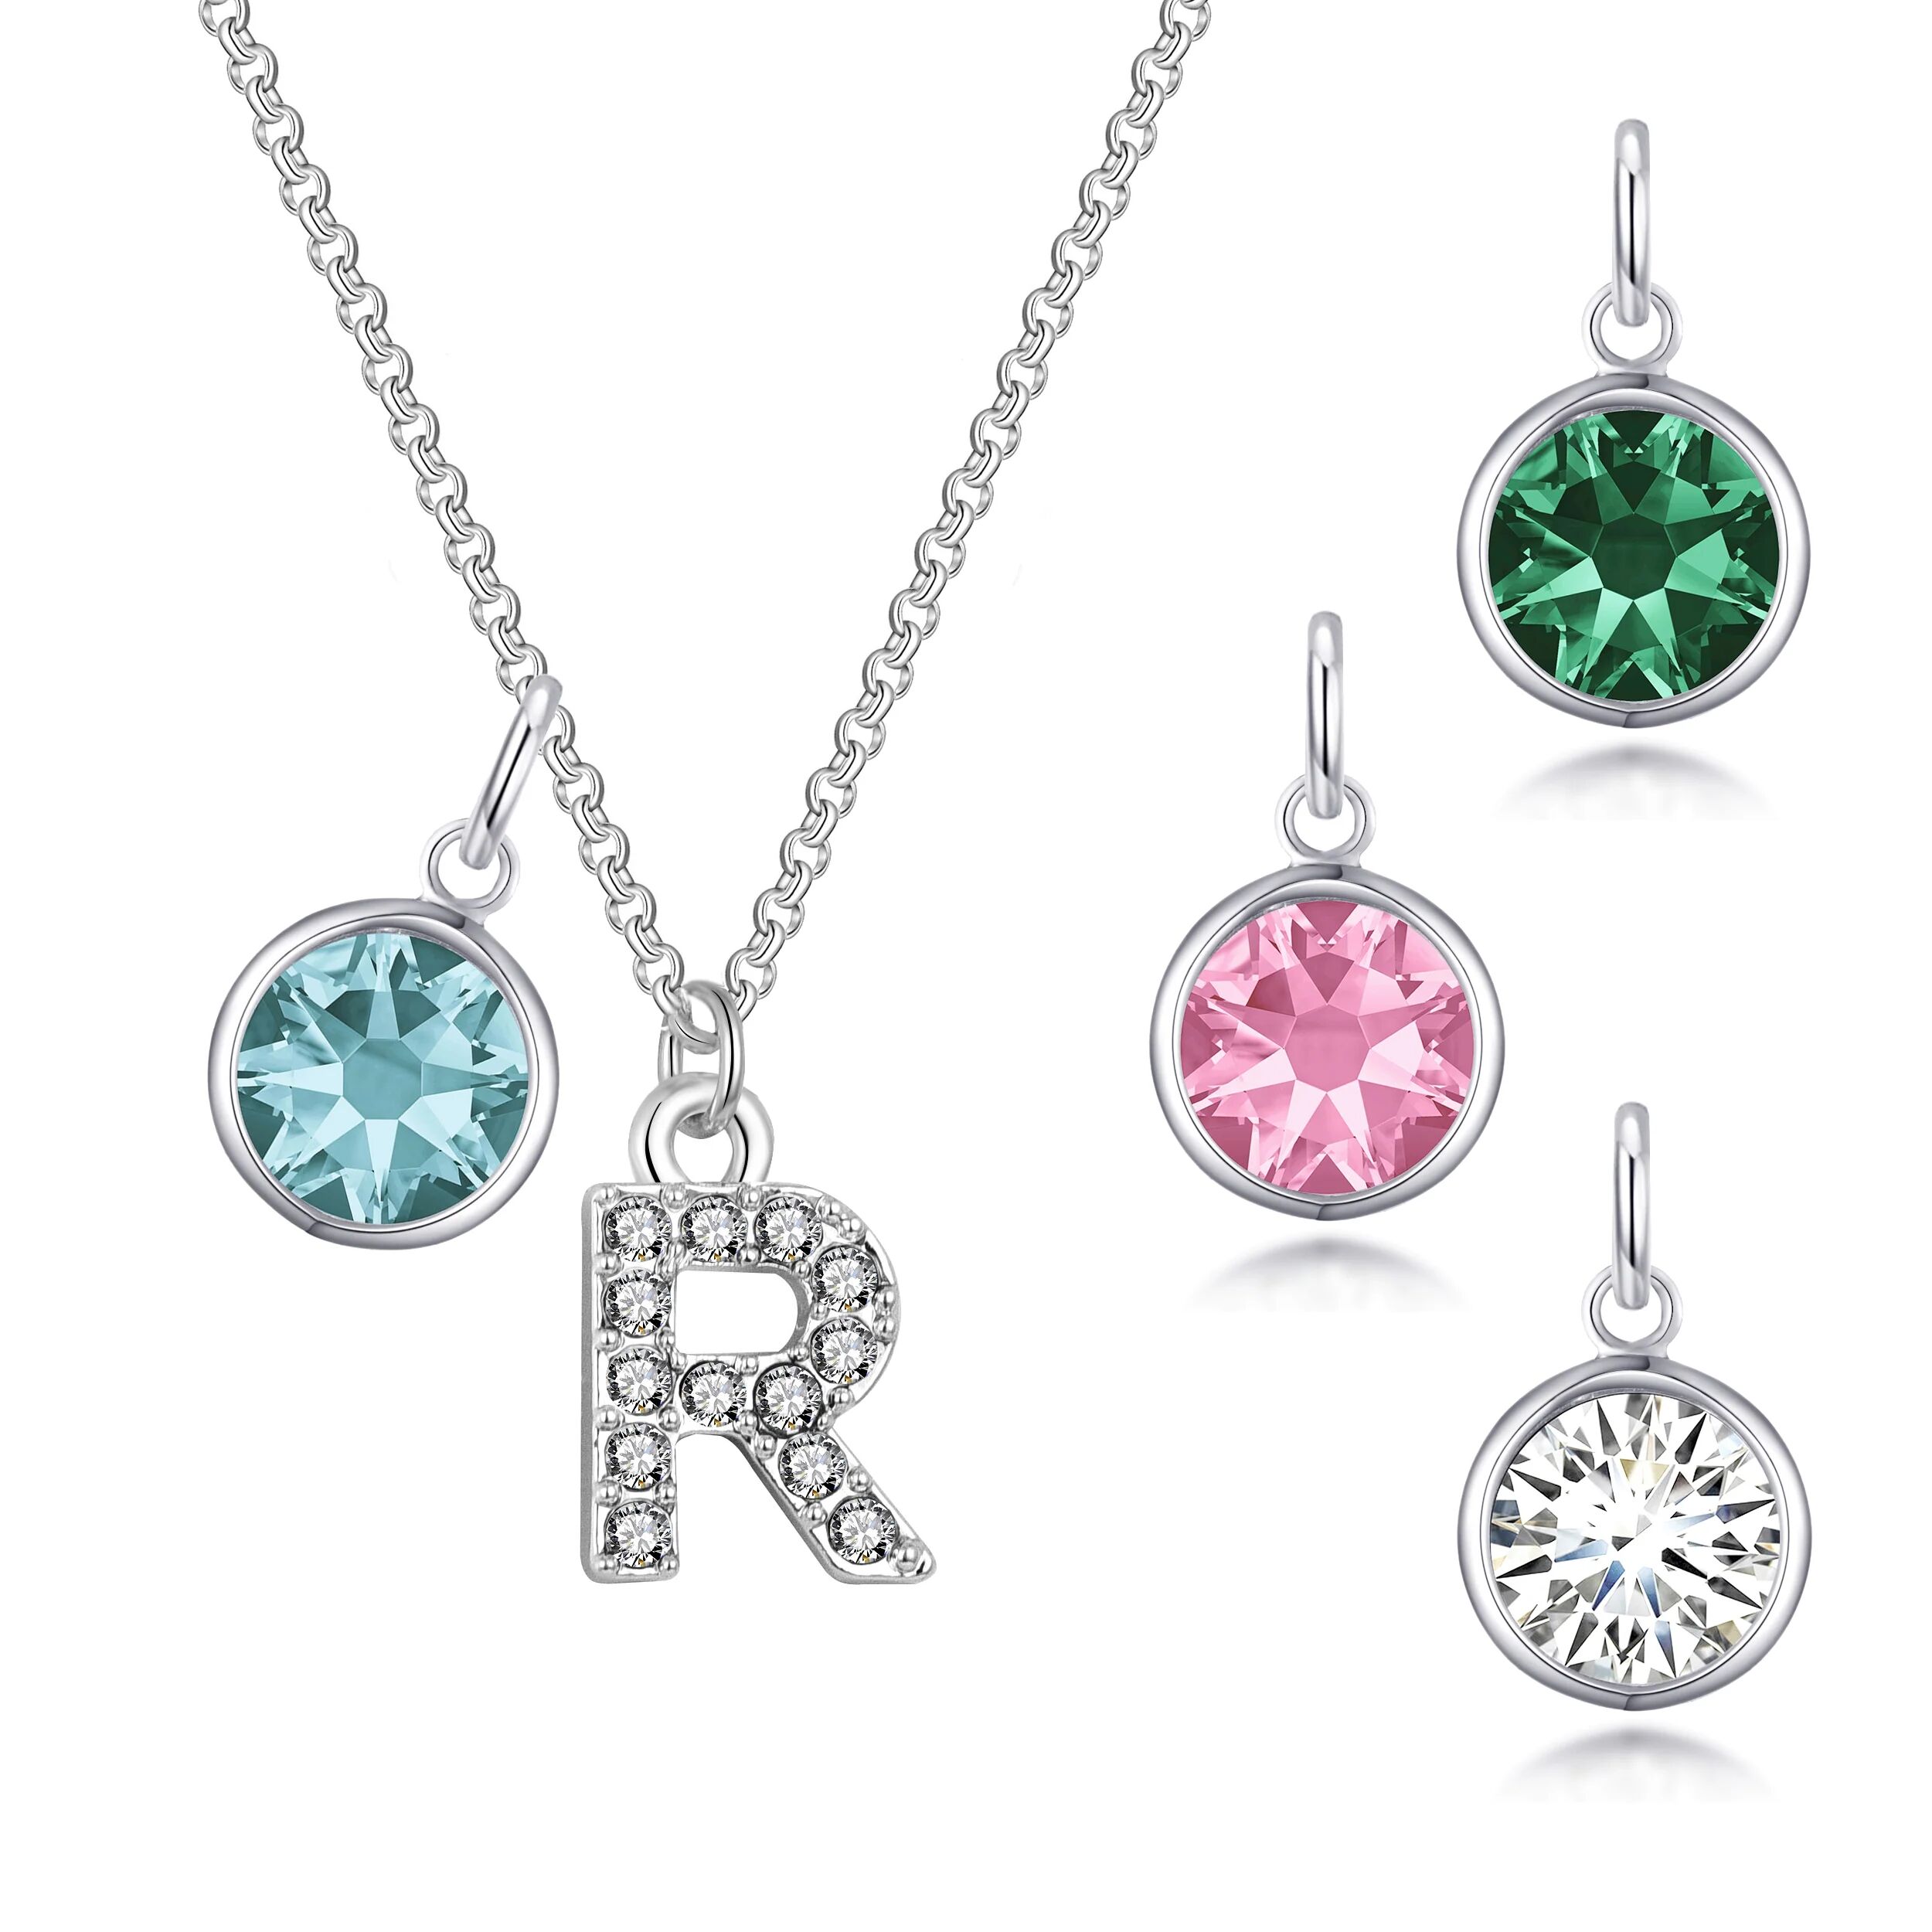 Philip Jones Jewellery Pave Initial R Necklace with Birthstone Charm Created with Zircondia® Crystals